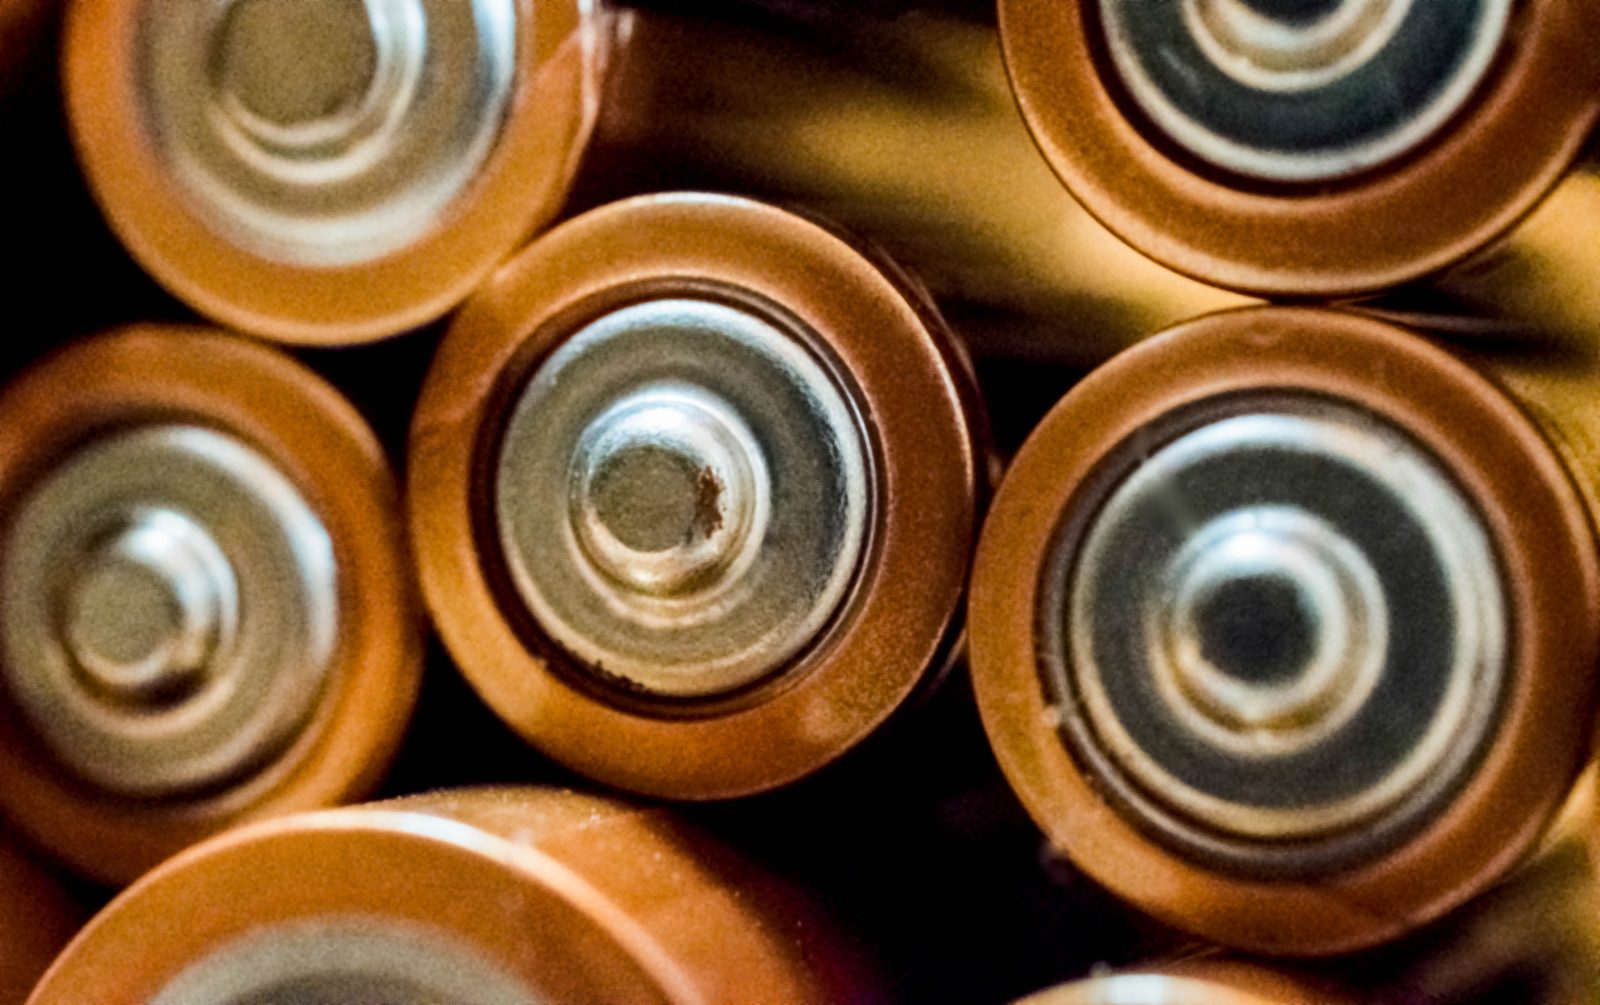 New used battery disposal service